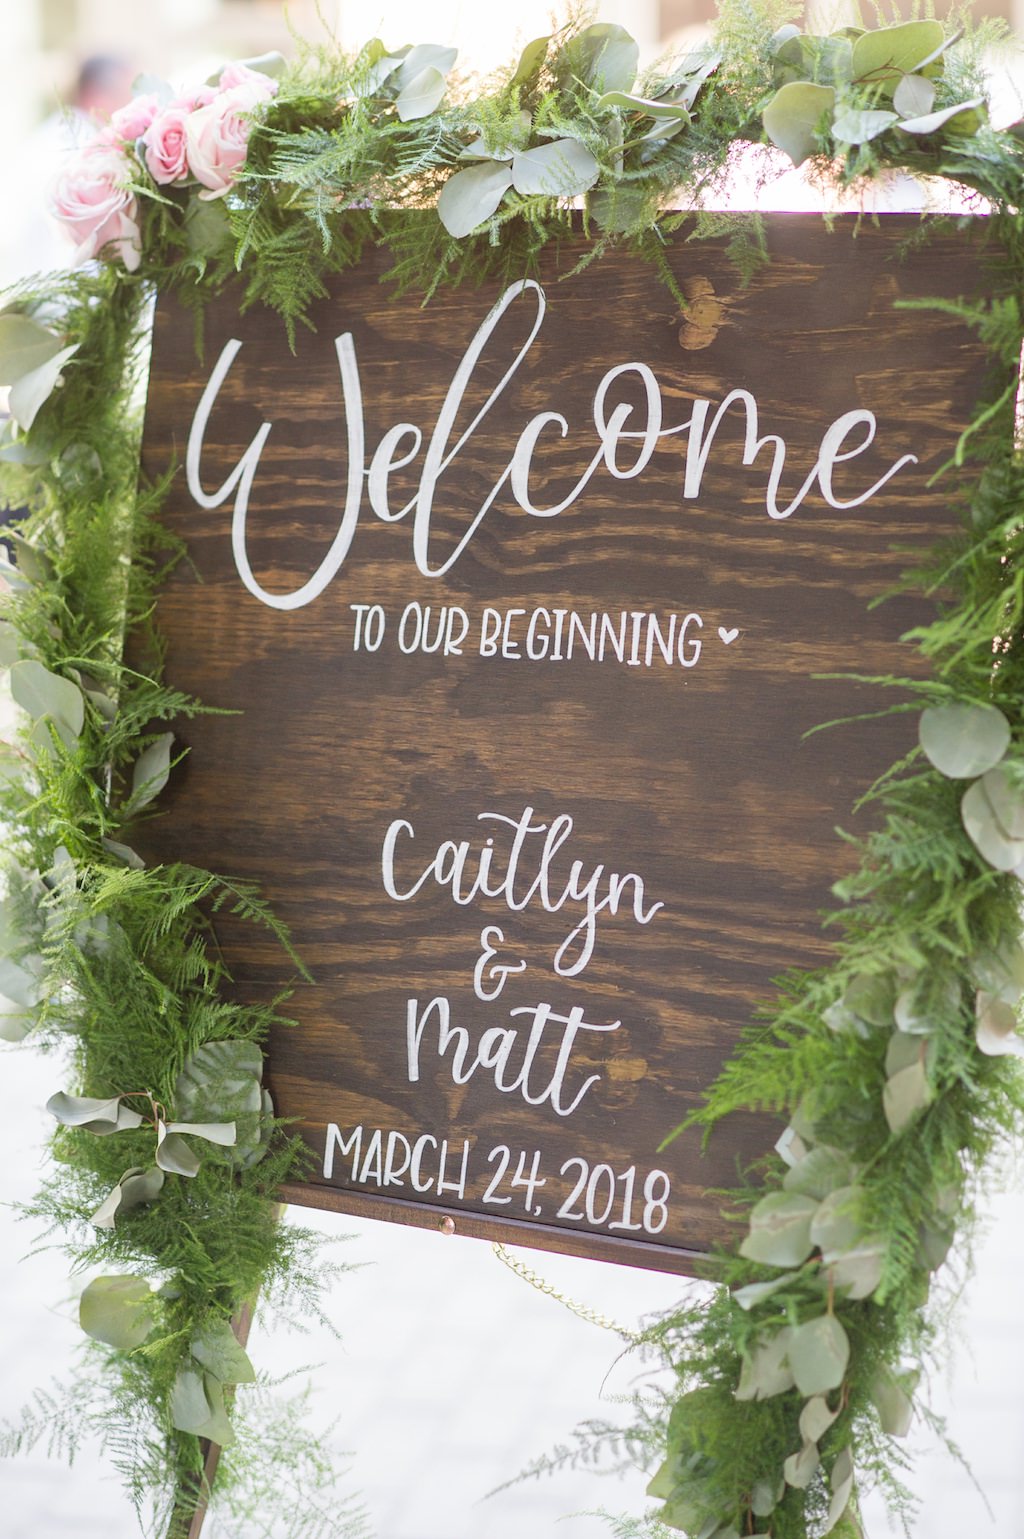 Outdoor Rustic Chic Wedding Ceremony Wooden Welcome Sign with White Handpainted Script and Greenery Garland with Pink Florals